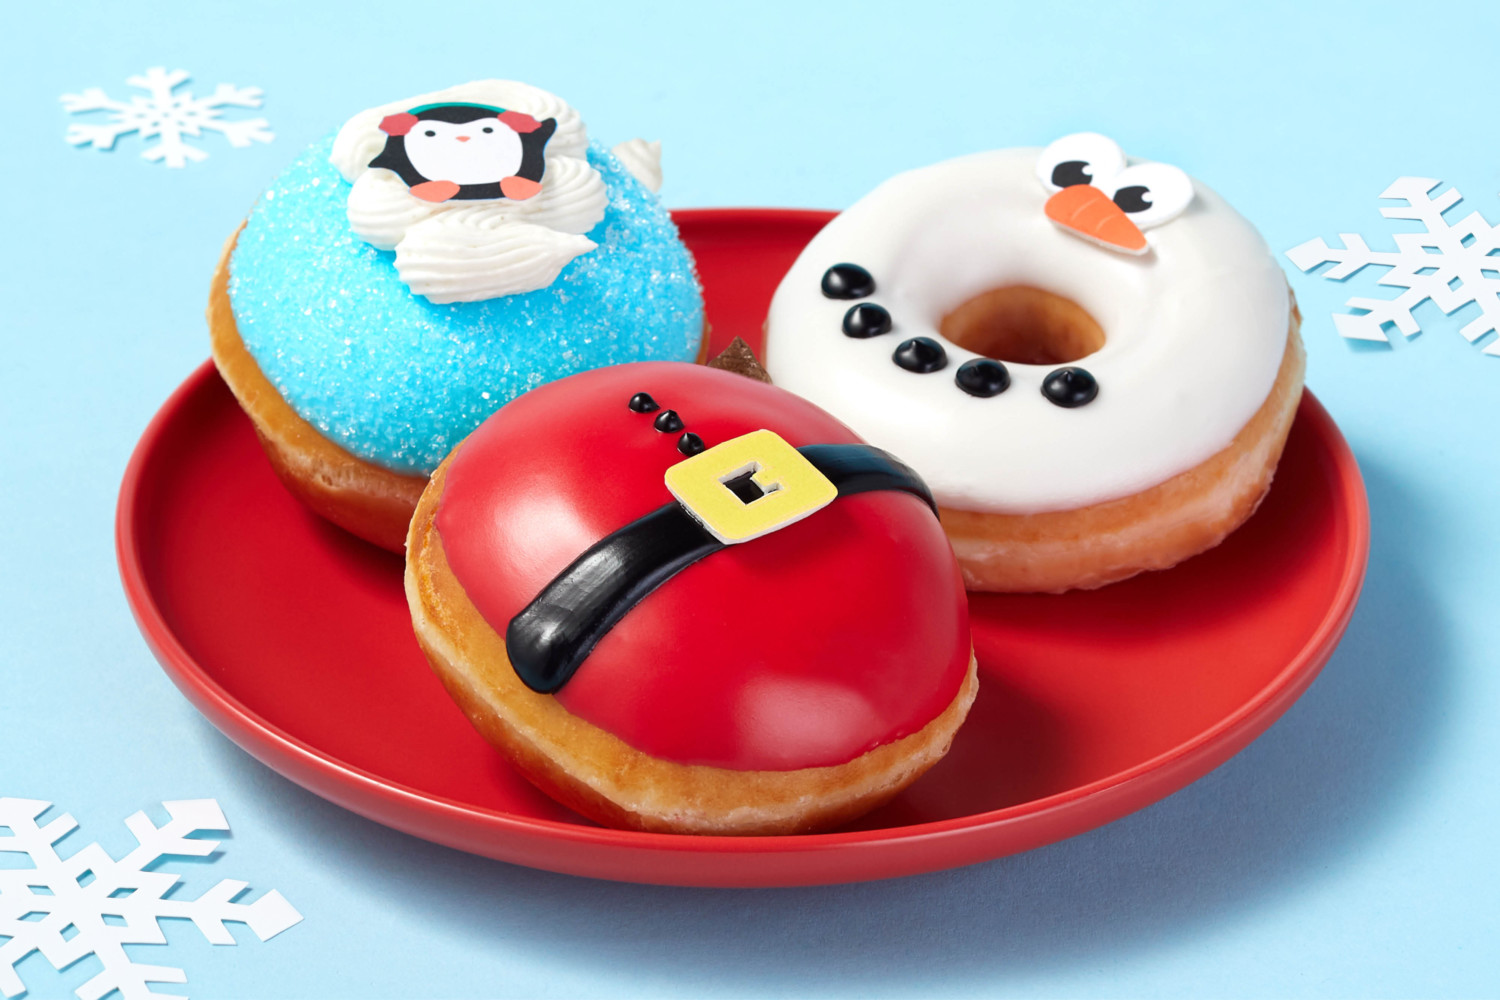 Krispy Kreme Introduces ‘Let It Snow’ Doughnuts For The Holidays